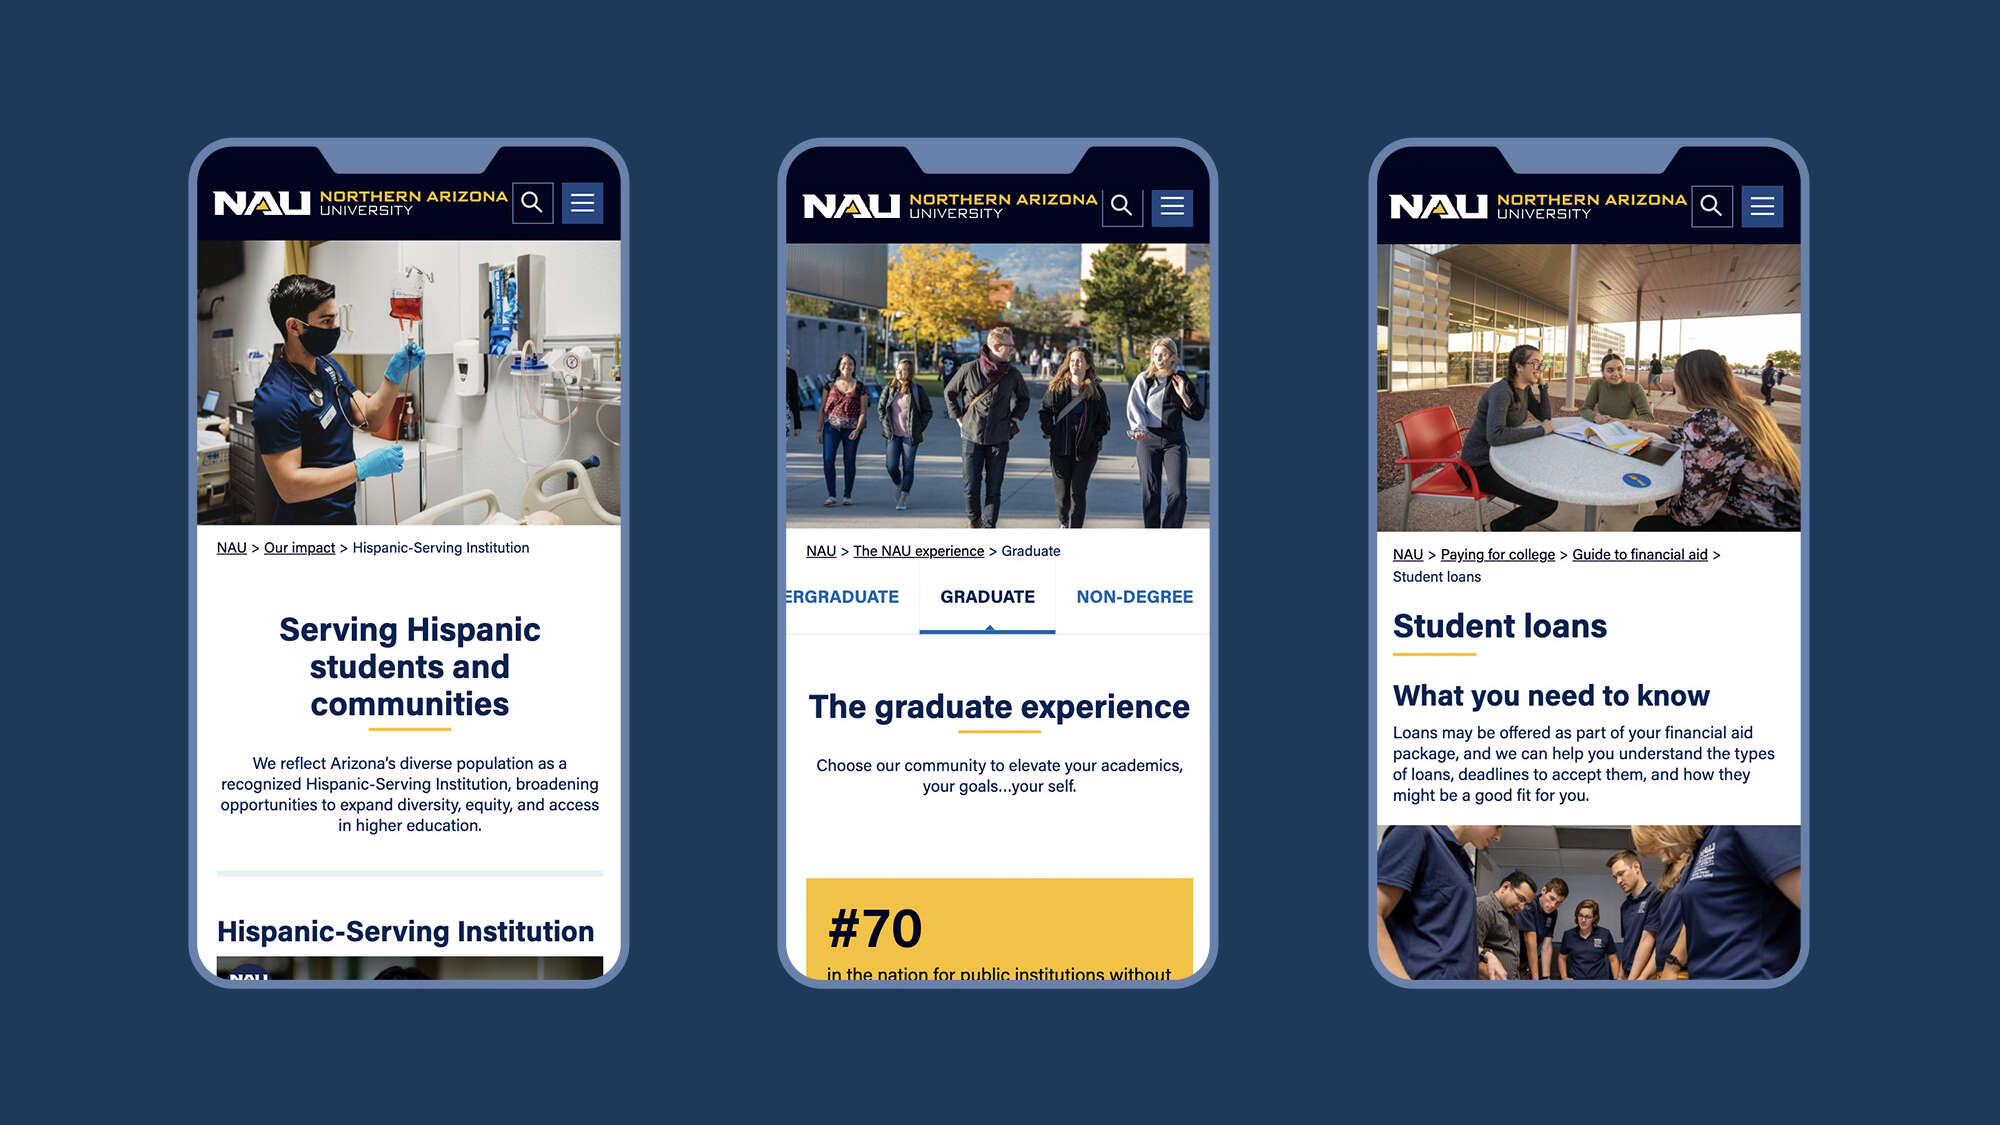 3 phones with webpages: Serving Hispanic students and communities, the graduate experience, Student loans